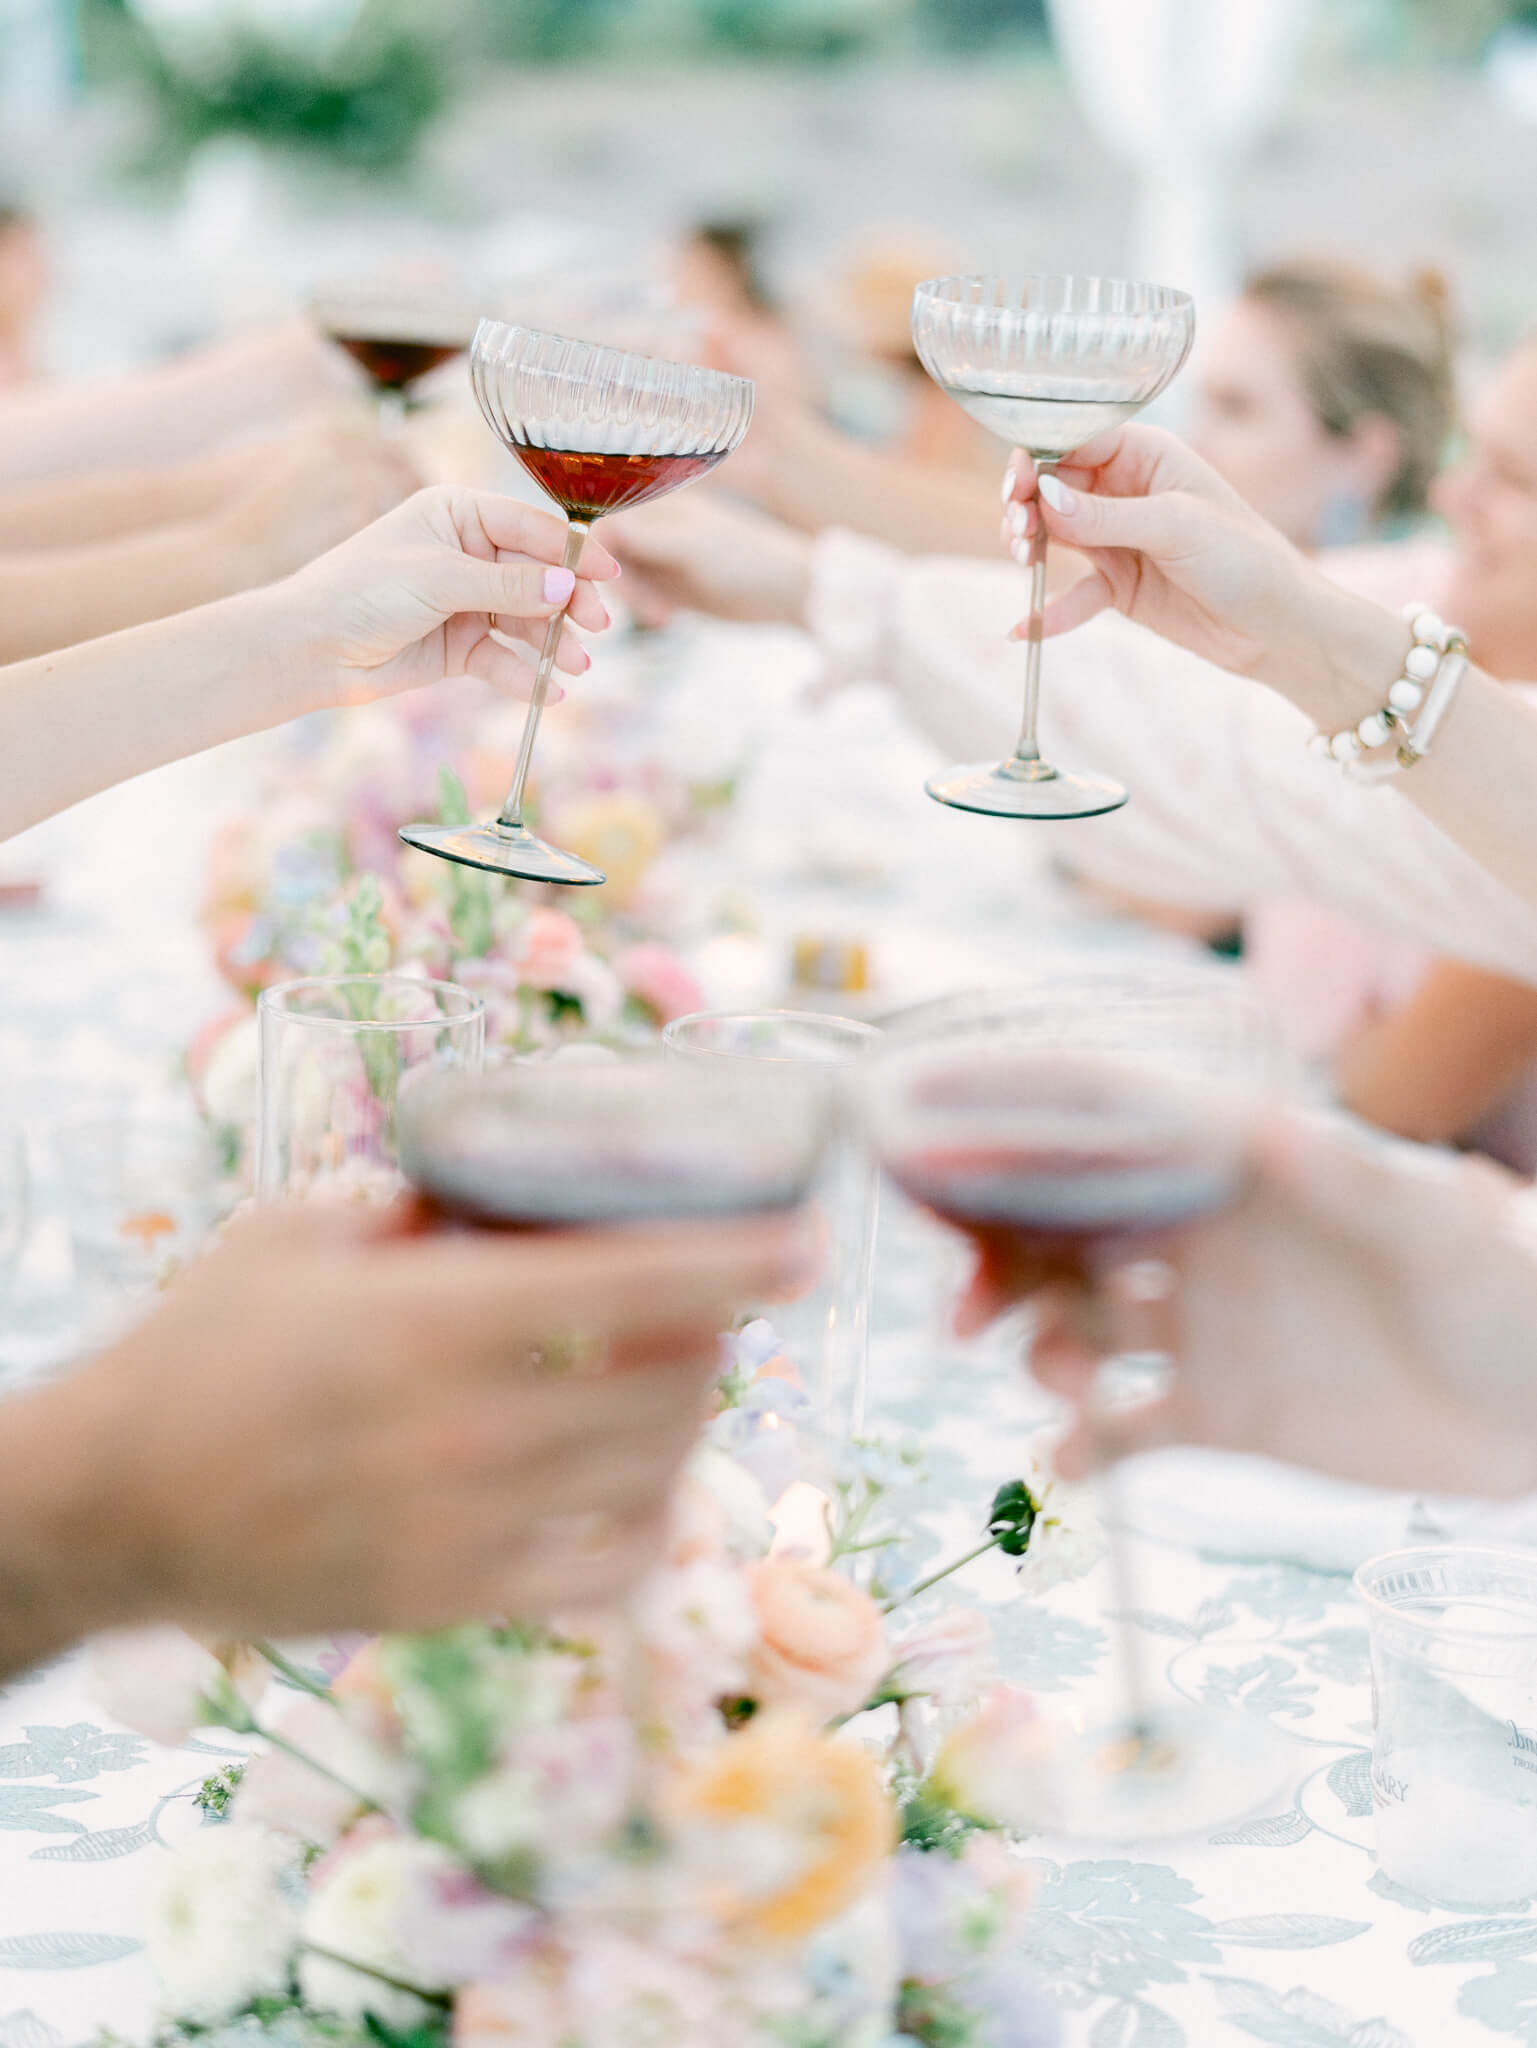 Close up of guests touching their champagne glasses together to cheers.